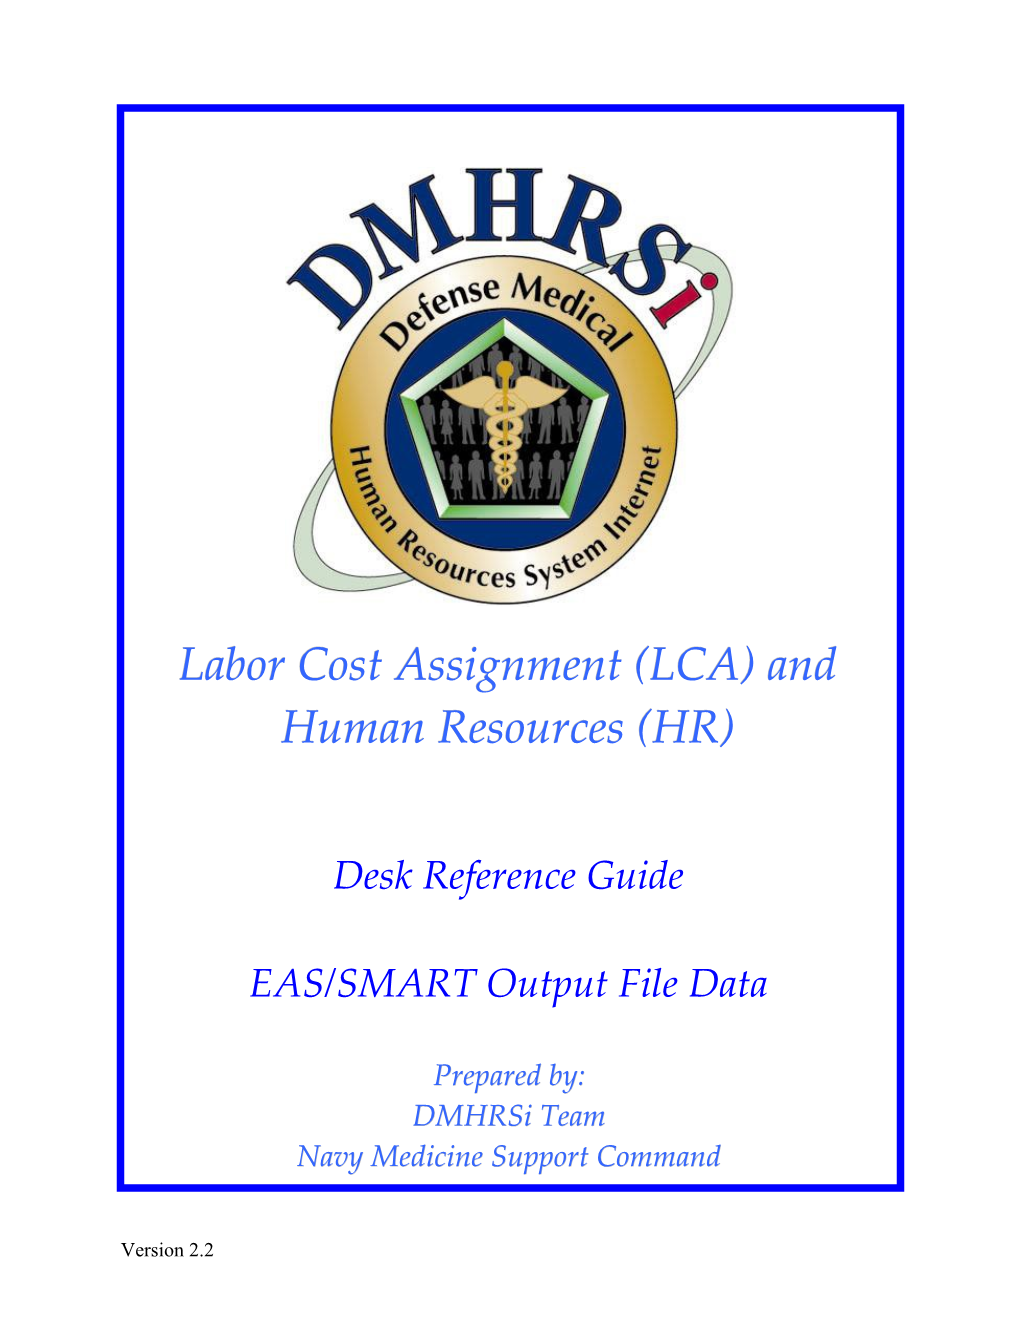 Labor Cost Assignment (LCA) And